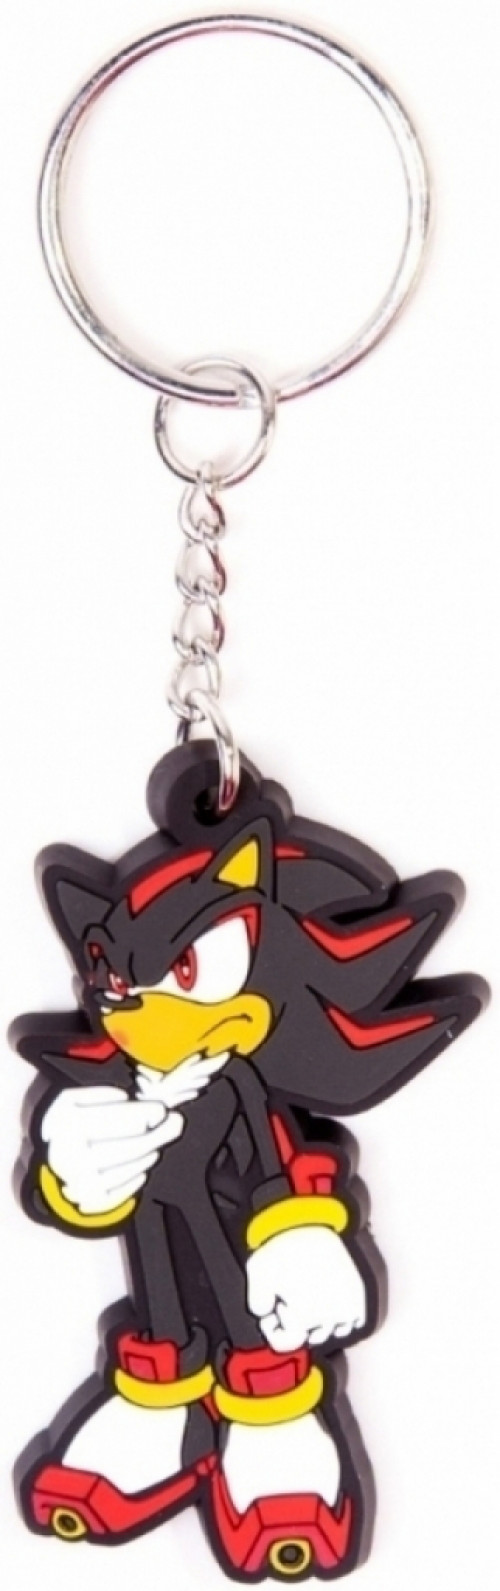 Image of Shadow Rubber Keychain